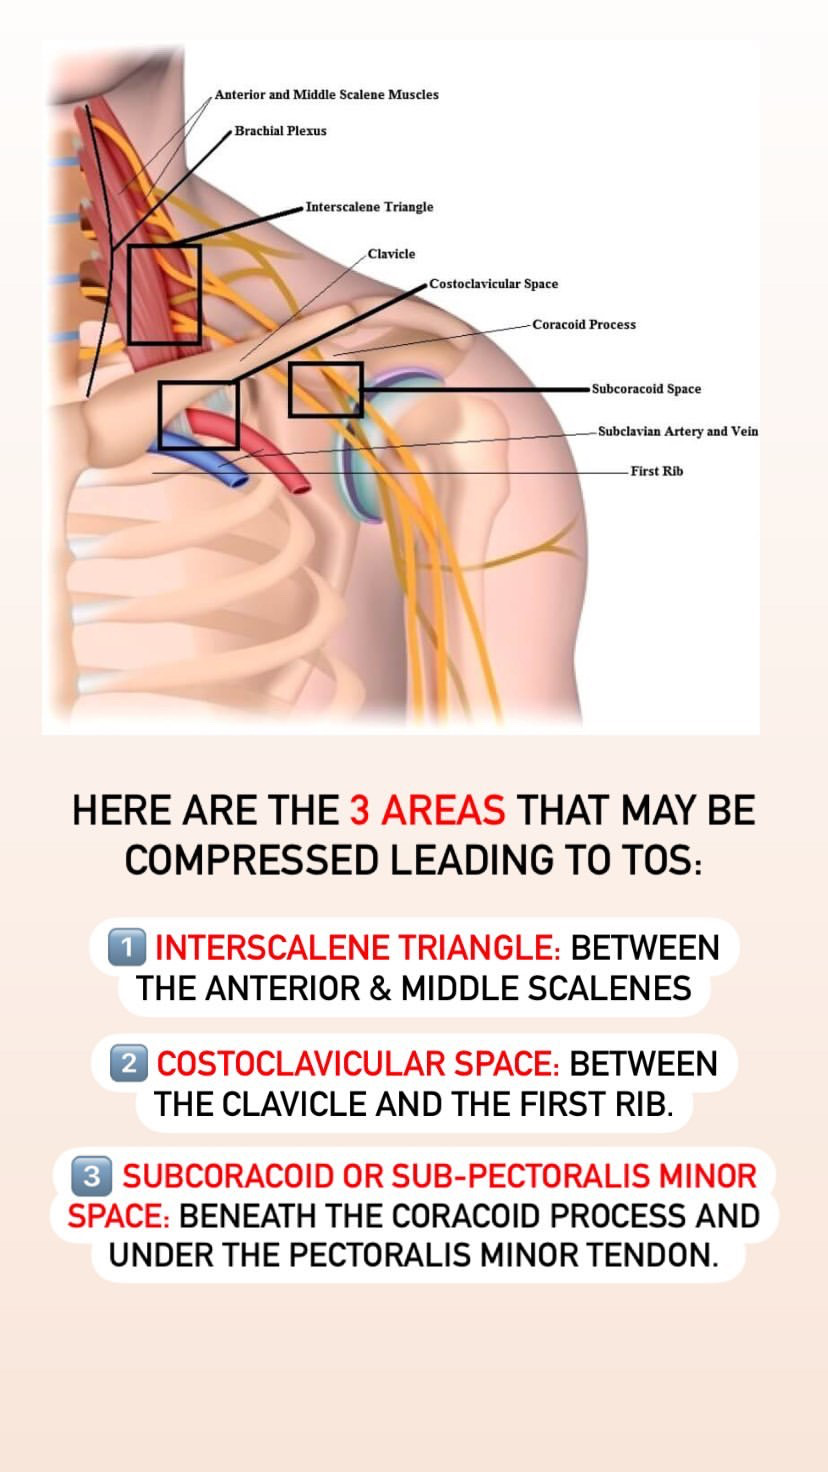 Prehab®️ on X: Pain with Thoracic Outlet Syndrome (TOS) presents anywhere  between the neck, face, occipital region or into the chest & shoulder, with  paresthesia into the upper extremity based on where